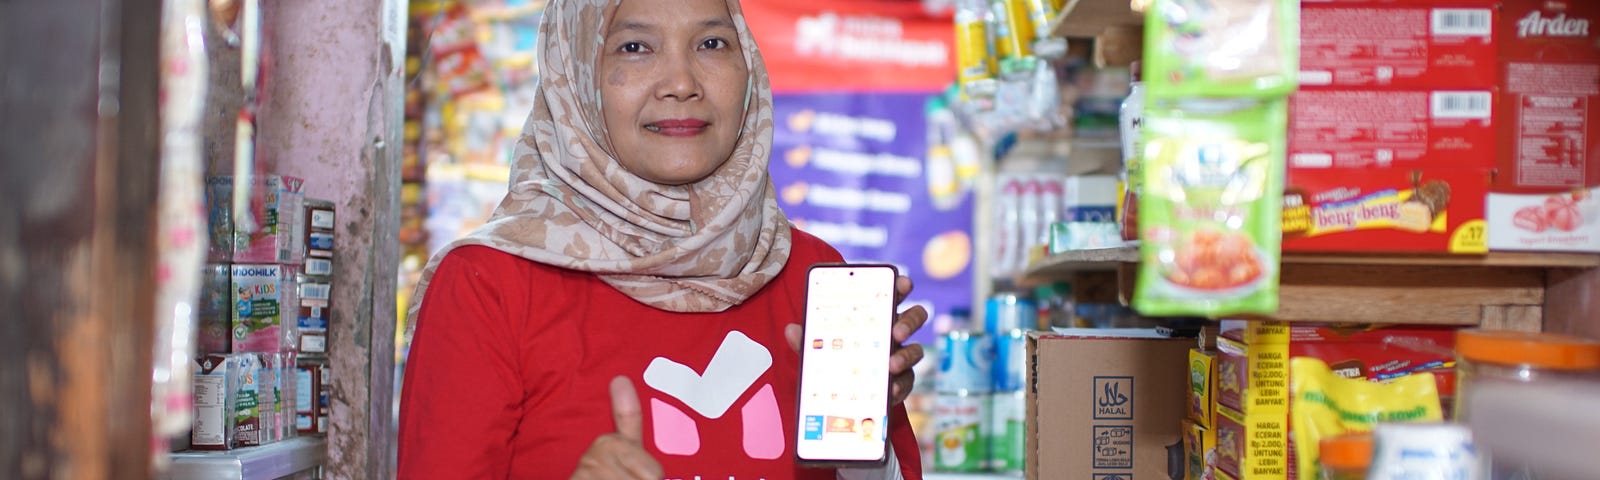 Ibu Retno stands in her store and demonstrates the Mitra Bukalapak application on her smartphone.